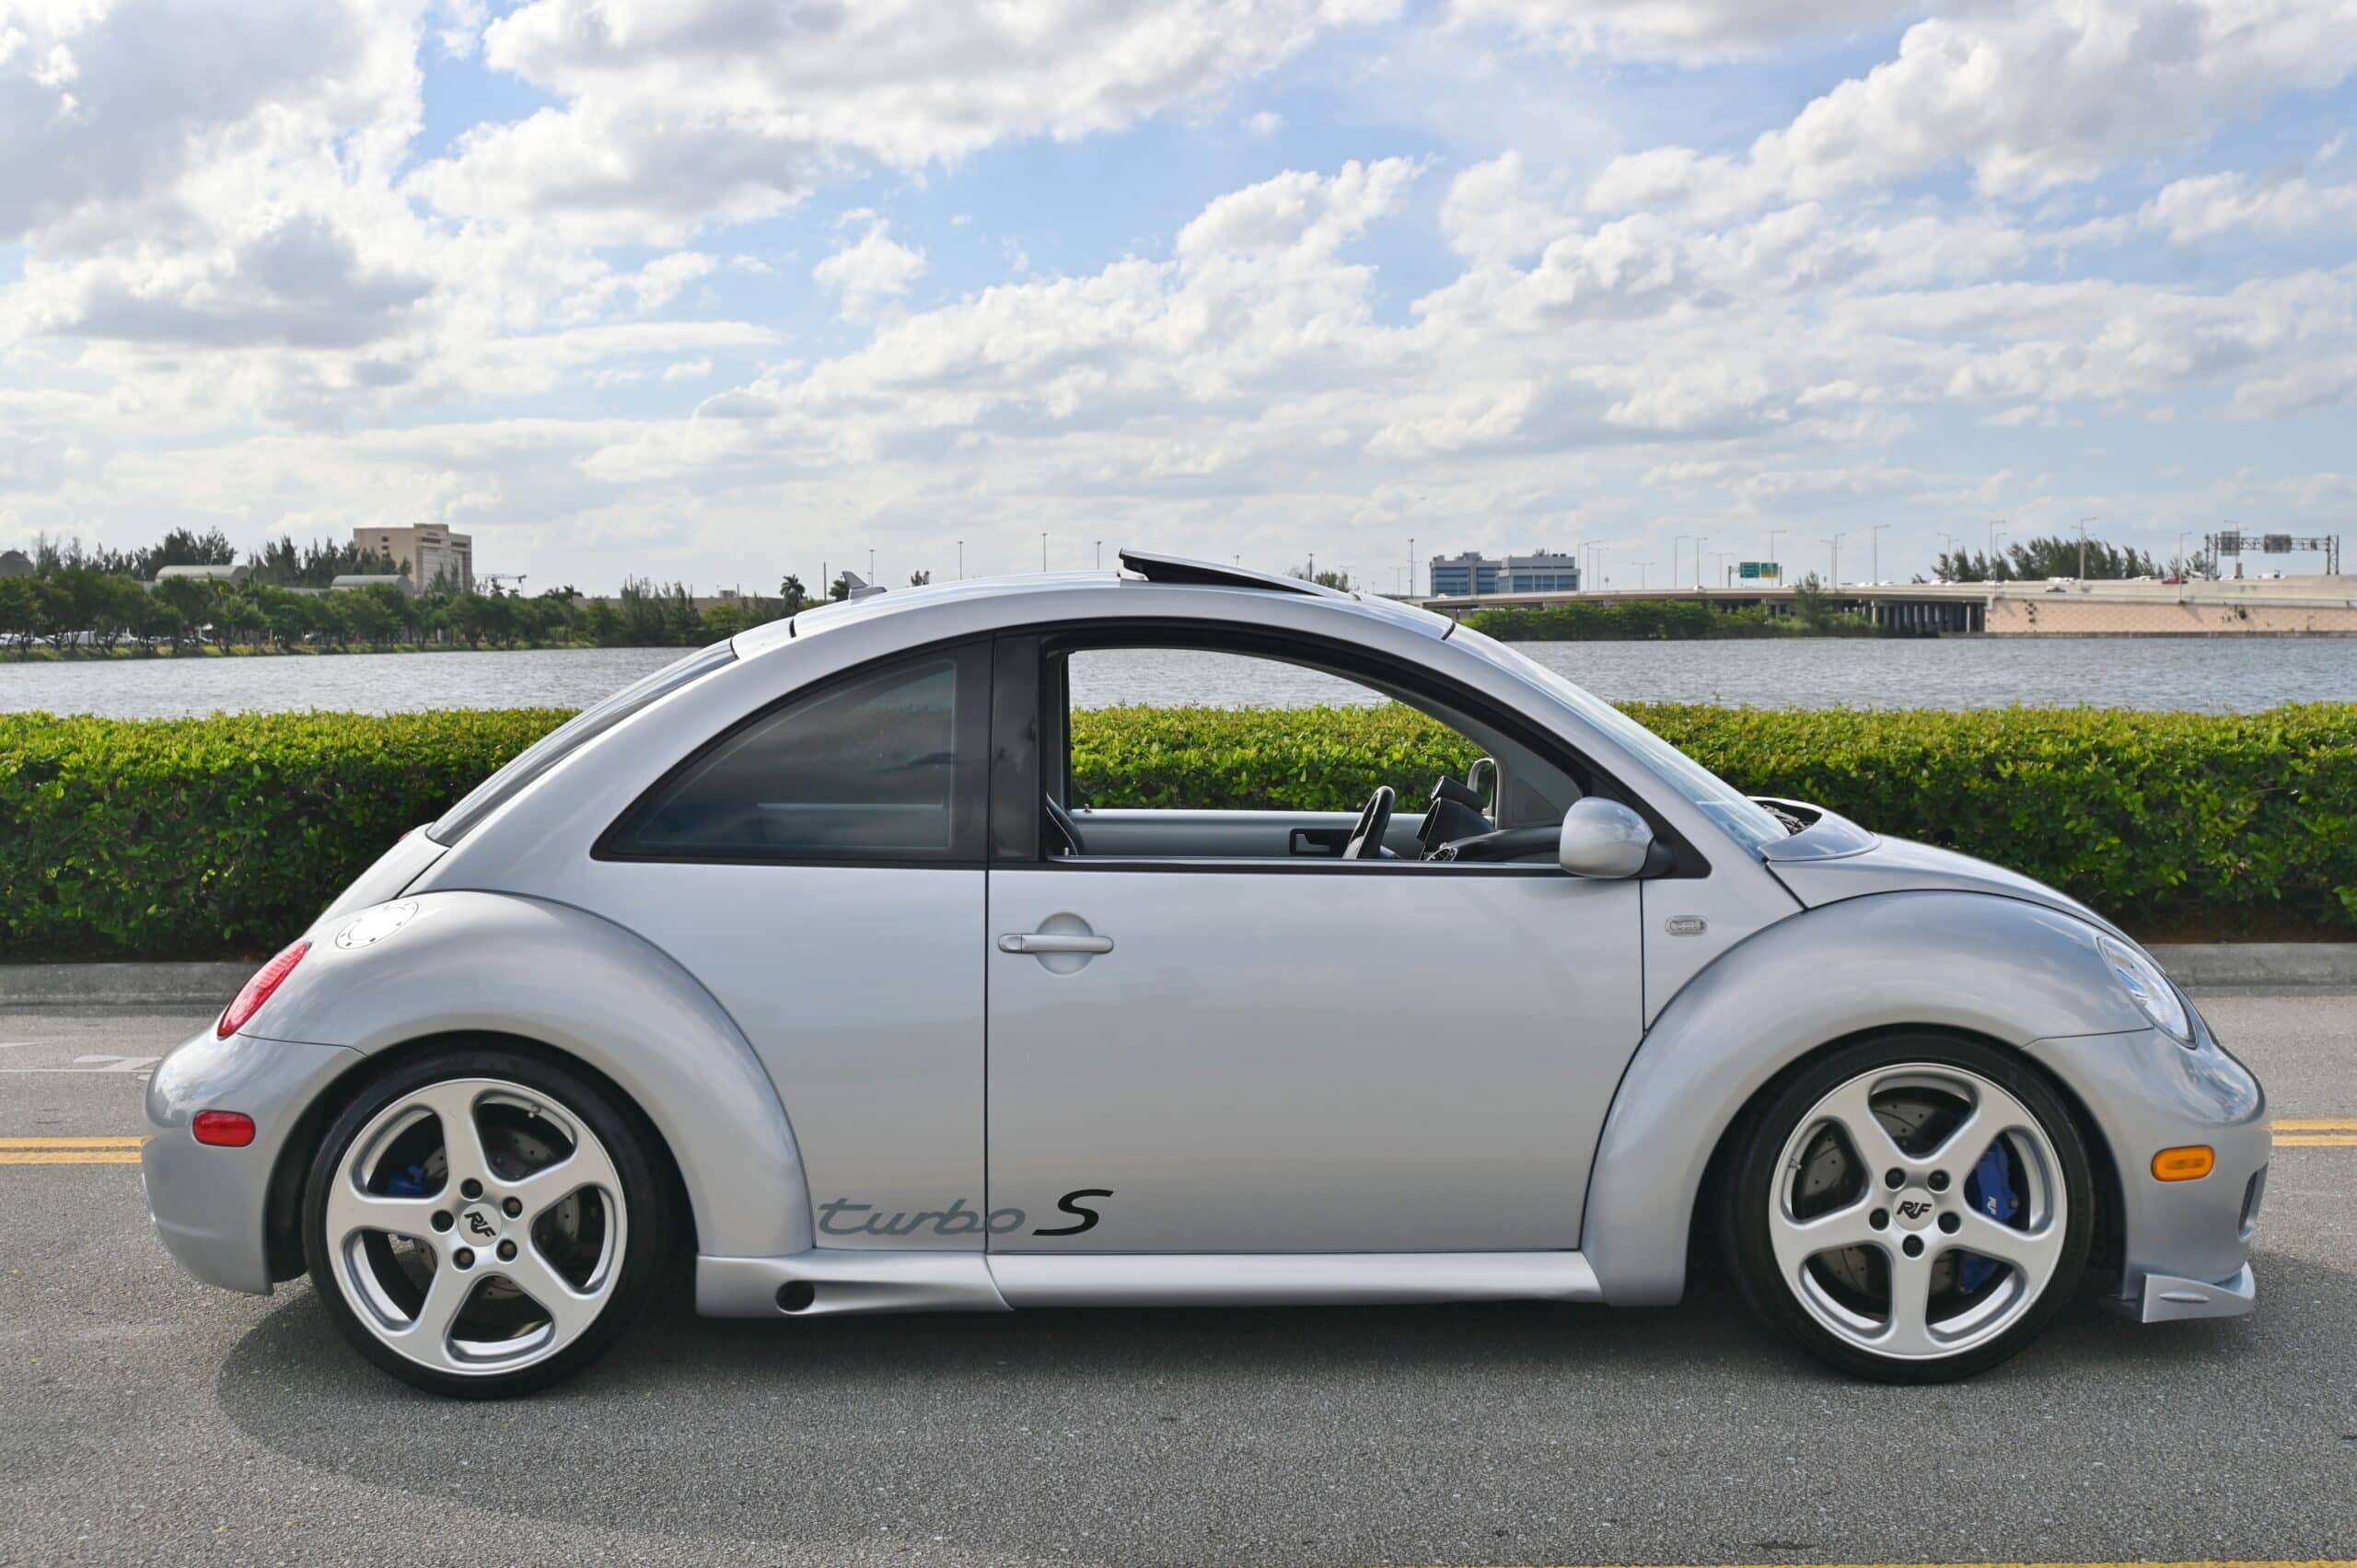 2002 Volkswagen Beetle RUF Turbo S 1 of 1 Built in collaboration with RUF / 6 Speed Manual / Custom RUF Modified